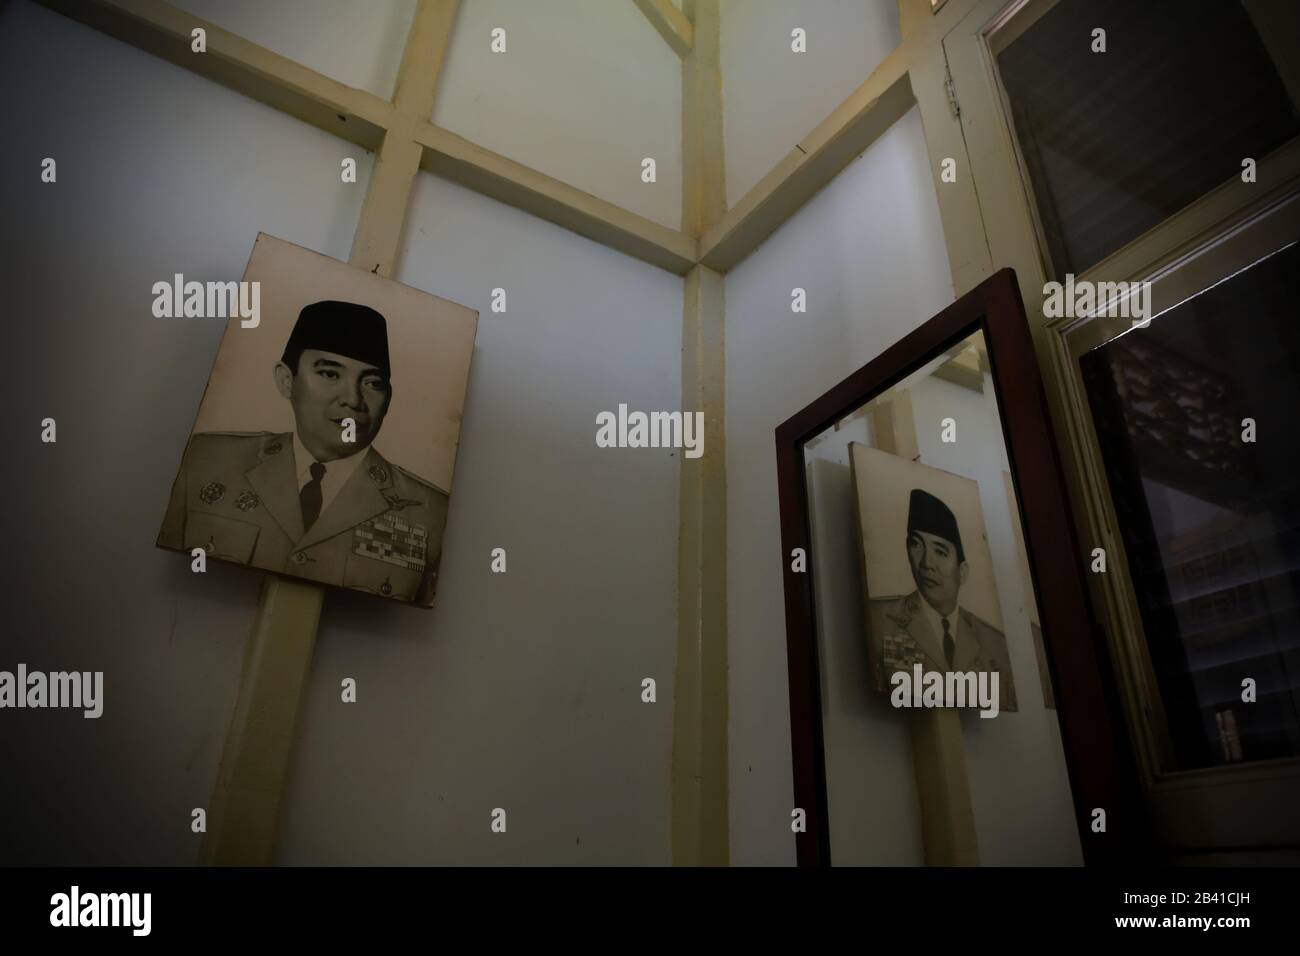 Printed photo of Indonesian first president Soekarno in a bedroom where he spent his exile time several years in Bengkulu, Indonesia. Stock Photo